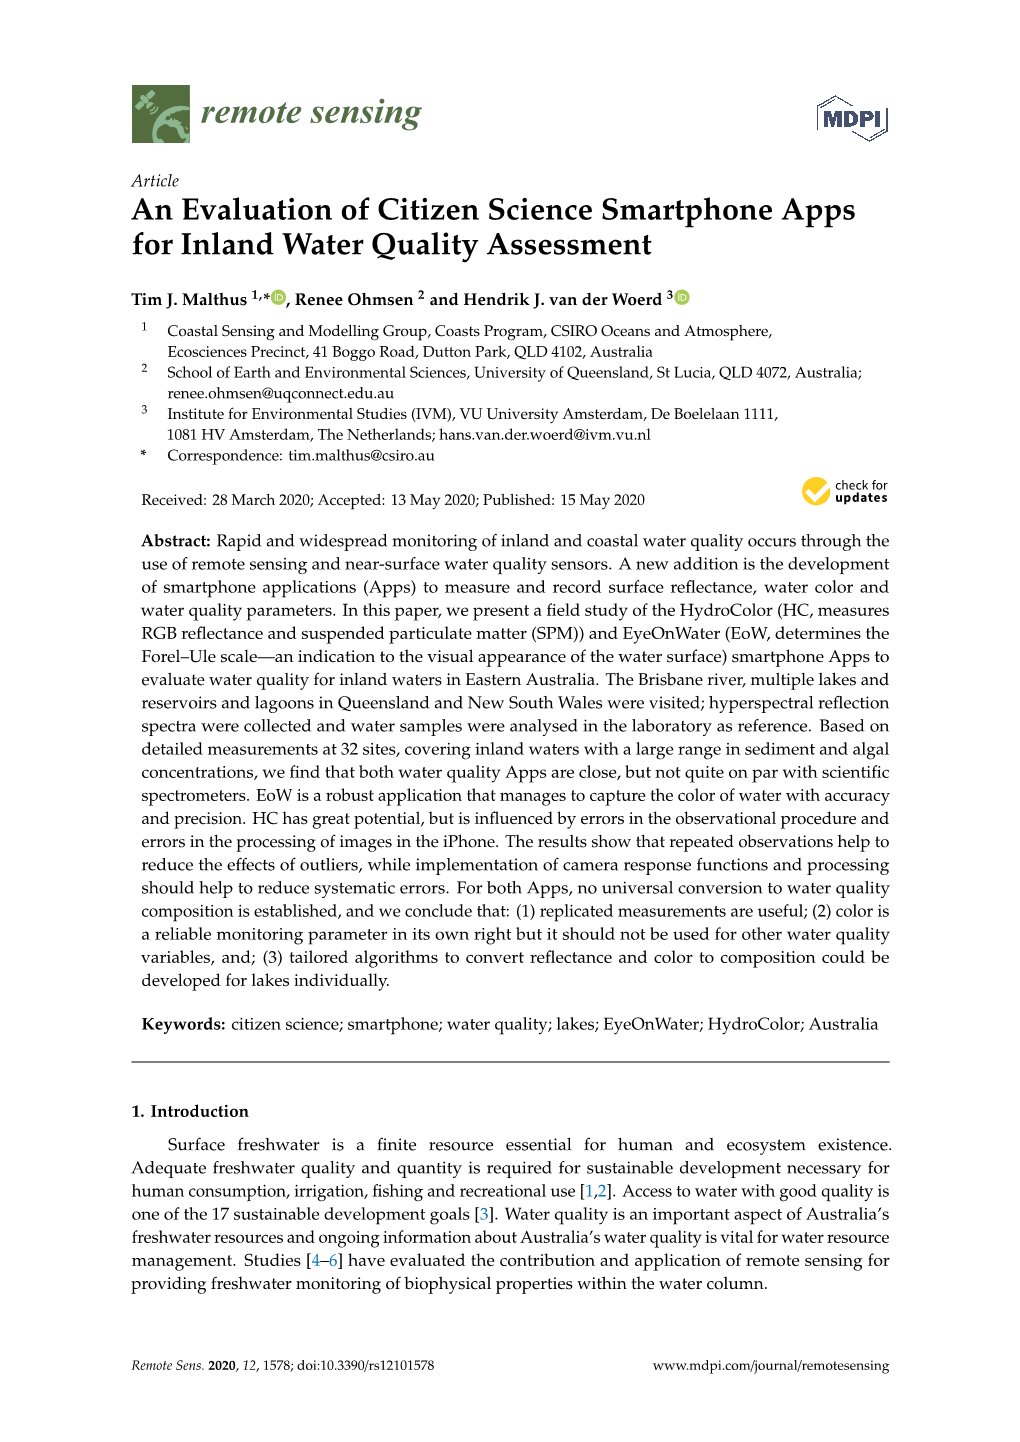 An Evaluation of Citizen Science Smartphone Apps for Inland Water Quality Assessment